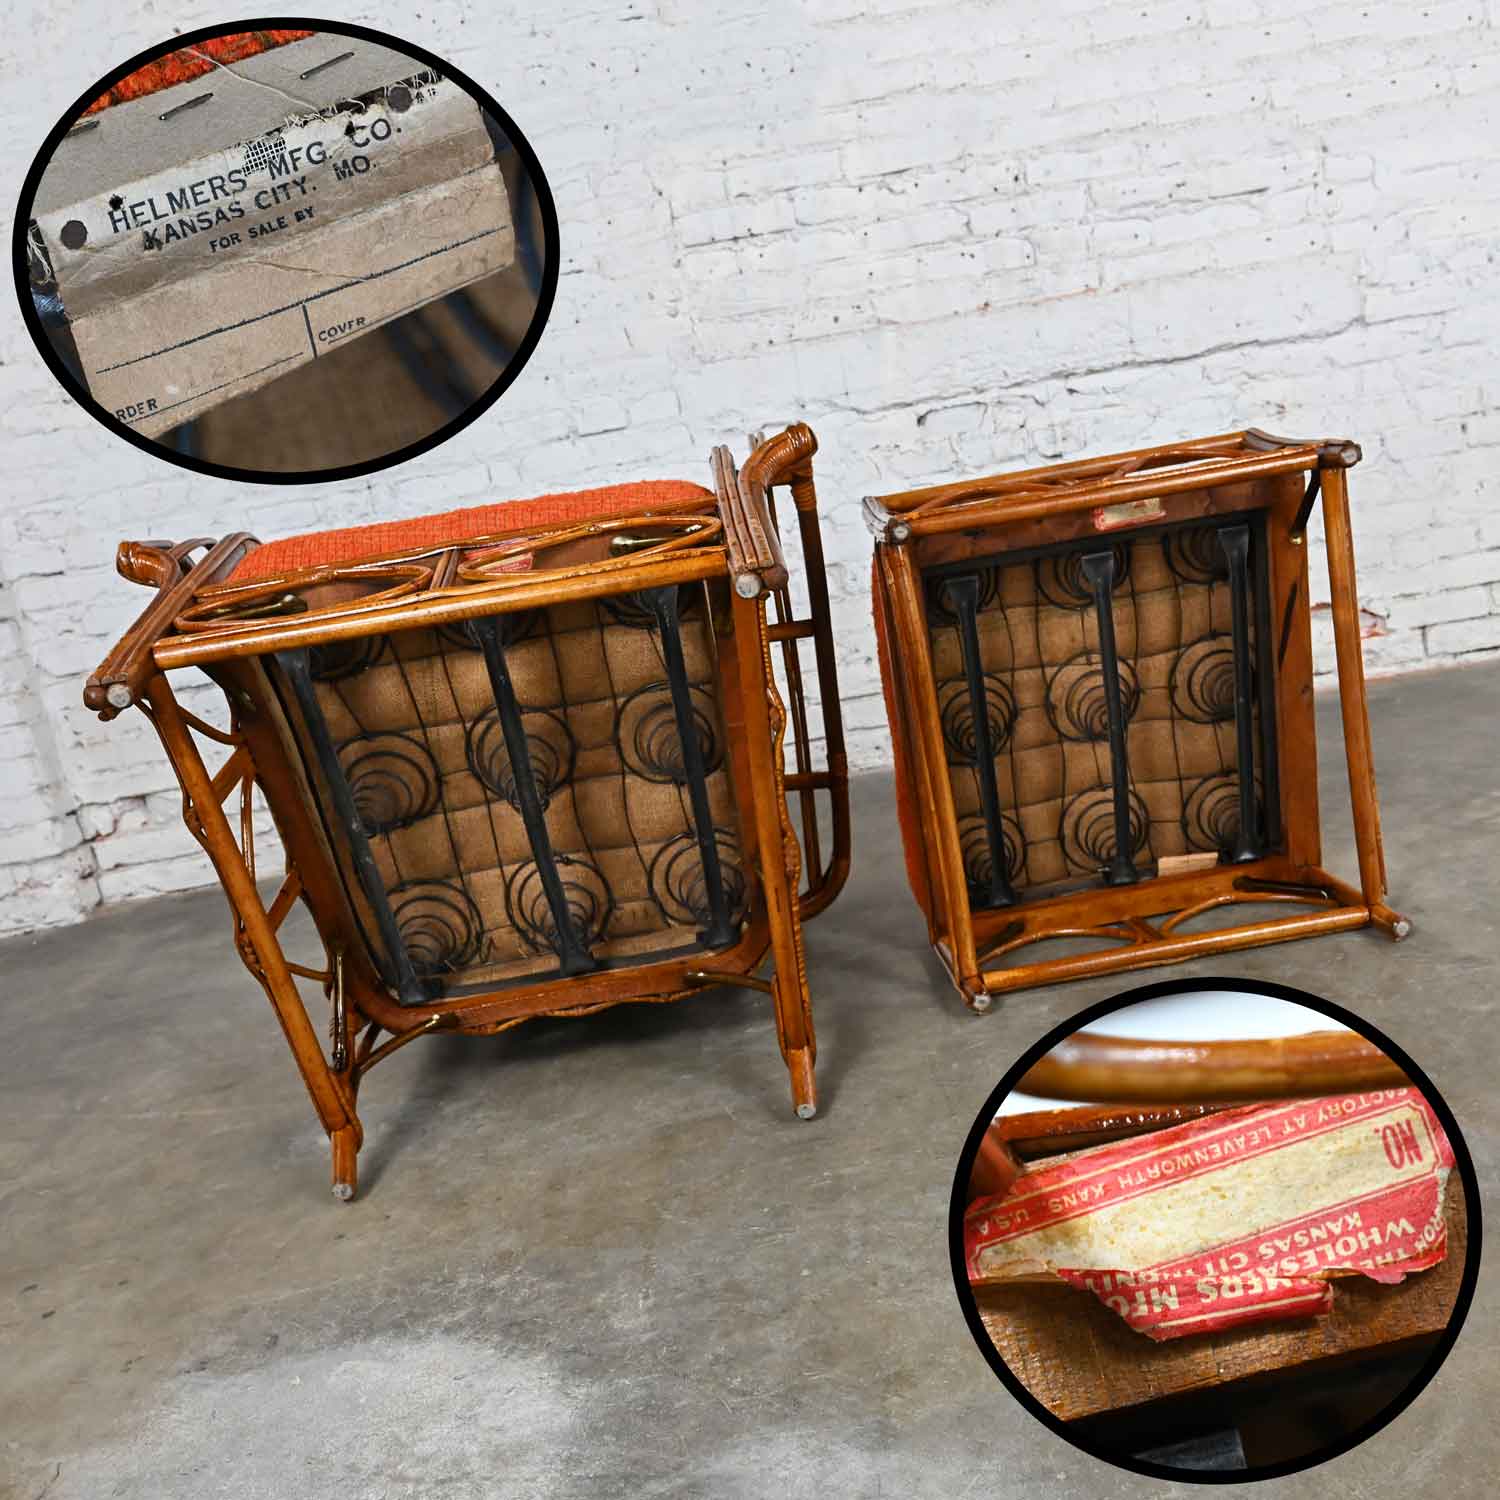 Early 20th Century Rattan Lounge Chair & Ottoman Orange Fabric Cushions by Helmers Manufacturing Company